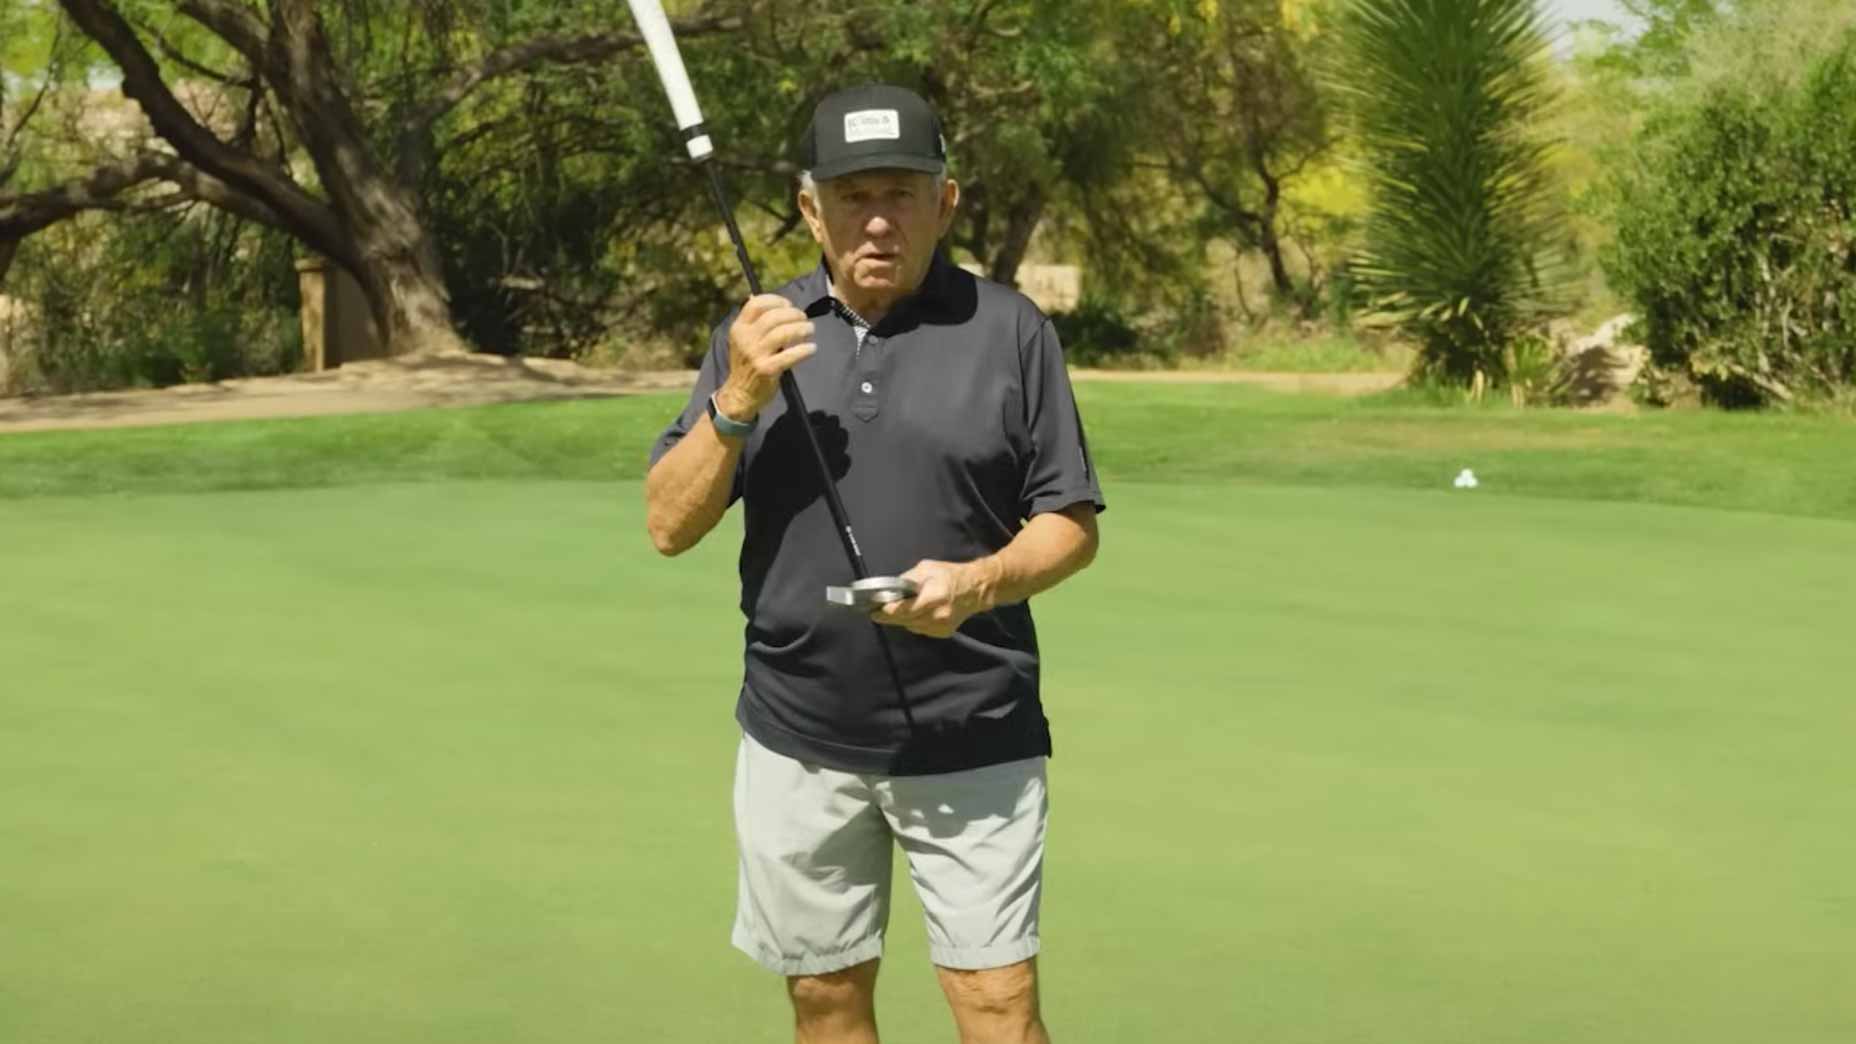 Struggling with touch on the greens? Peter Kostis shares easy steps to control your putting follow through for improved distance control